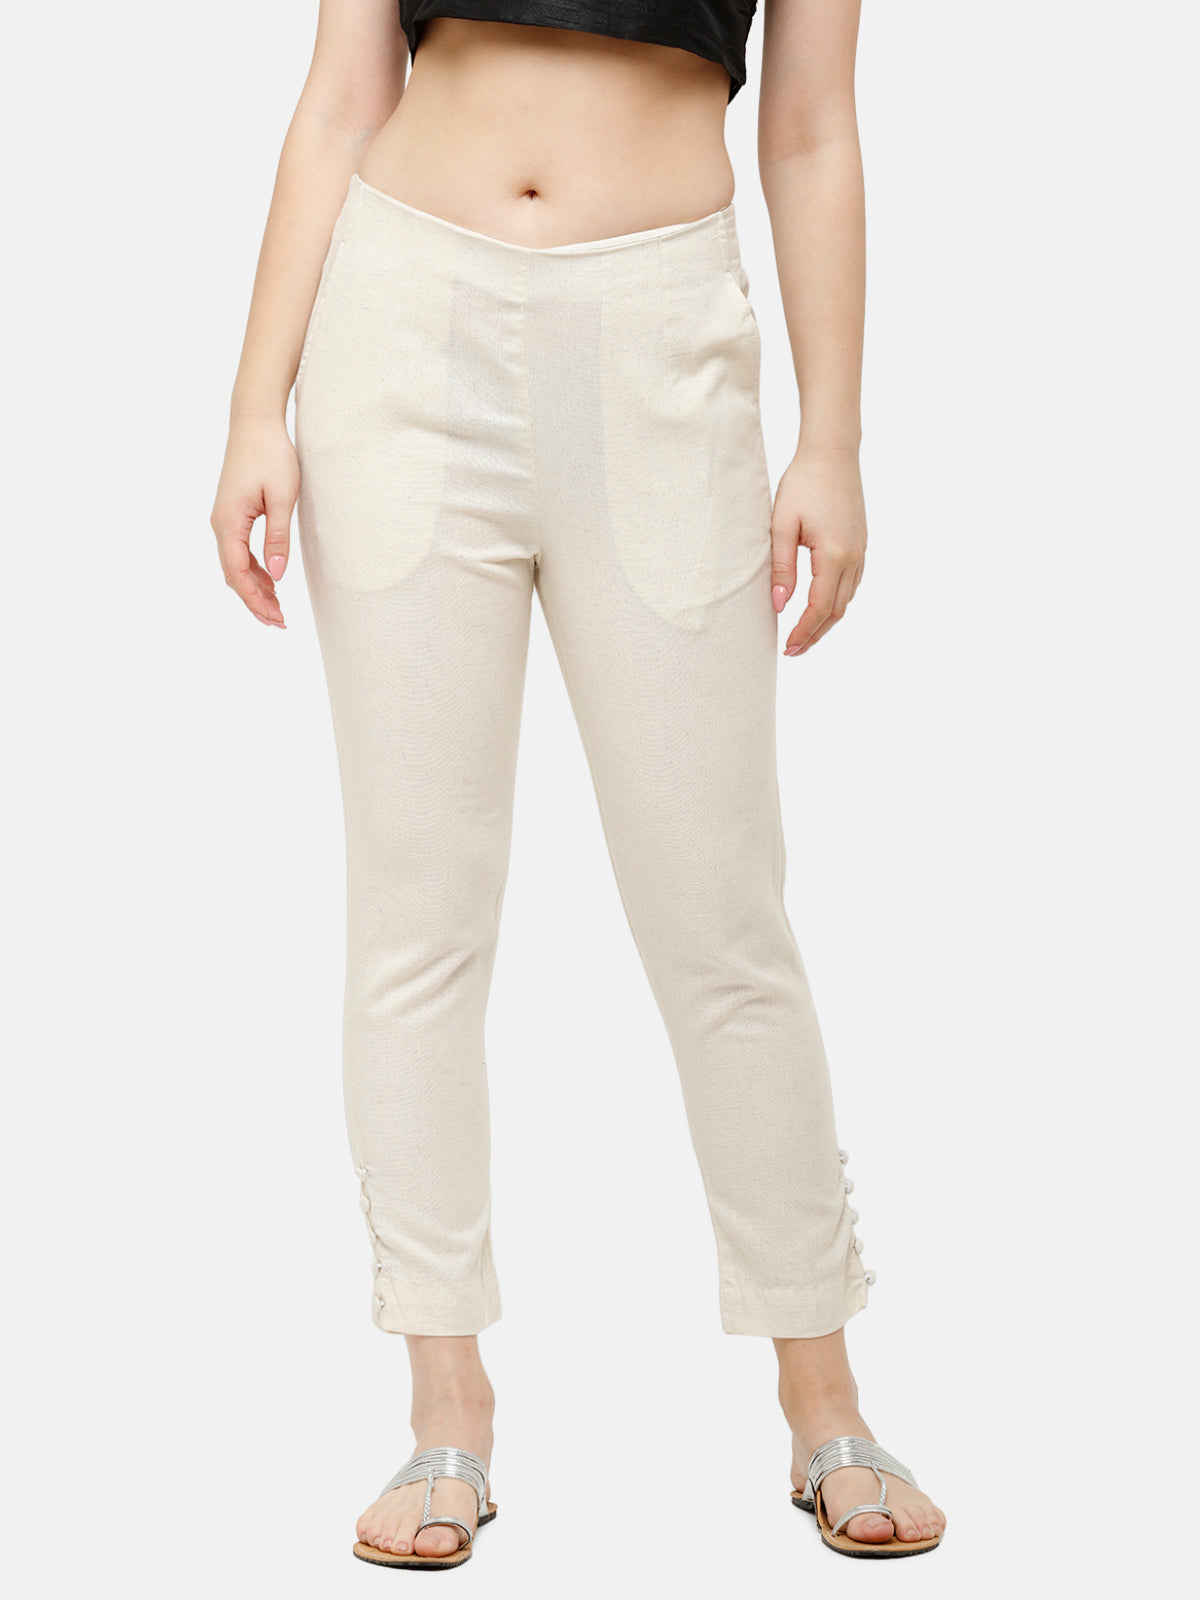 Buy bulbul Fashionable Cotton Lycra Stretchable Slim Fit Straight Casual Cigarette  Pants for Girls/Ladies/Women Beige Online In India At Discounted Prices